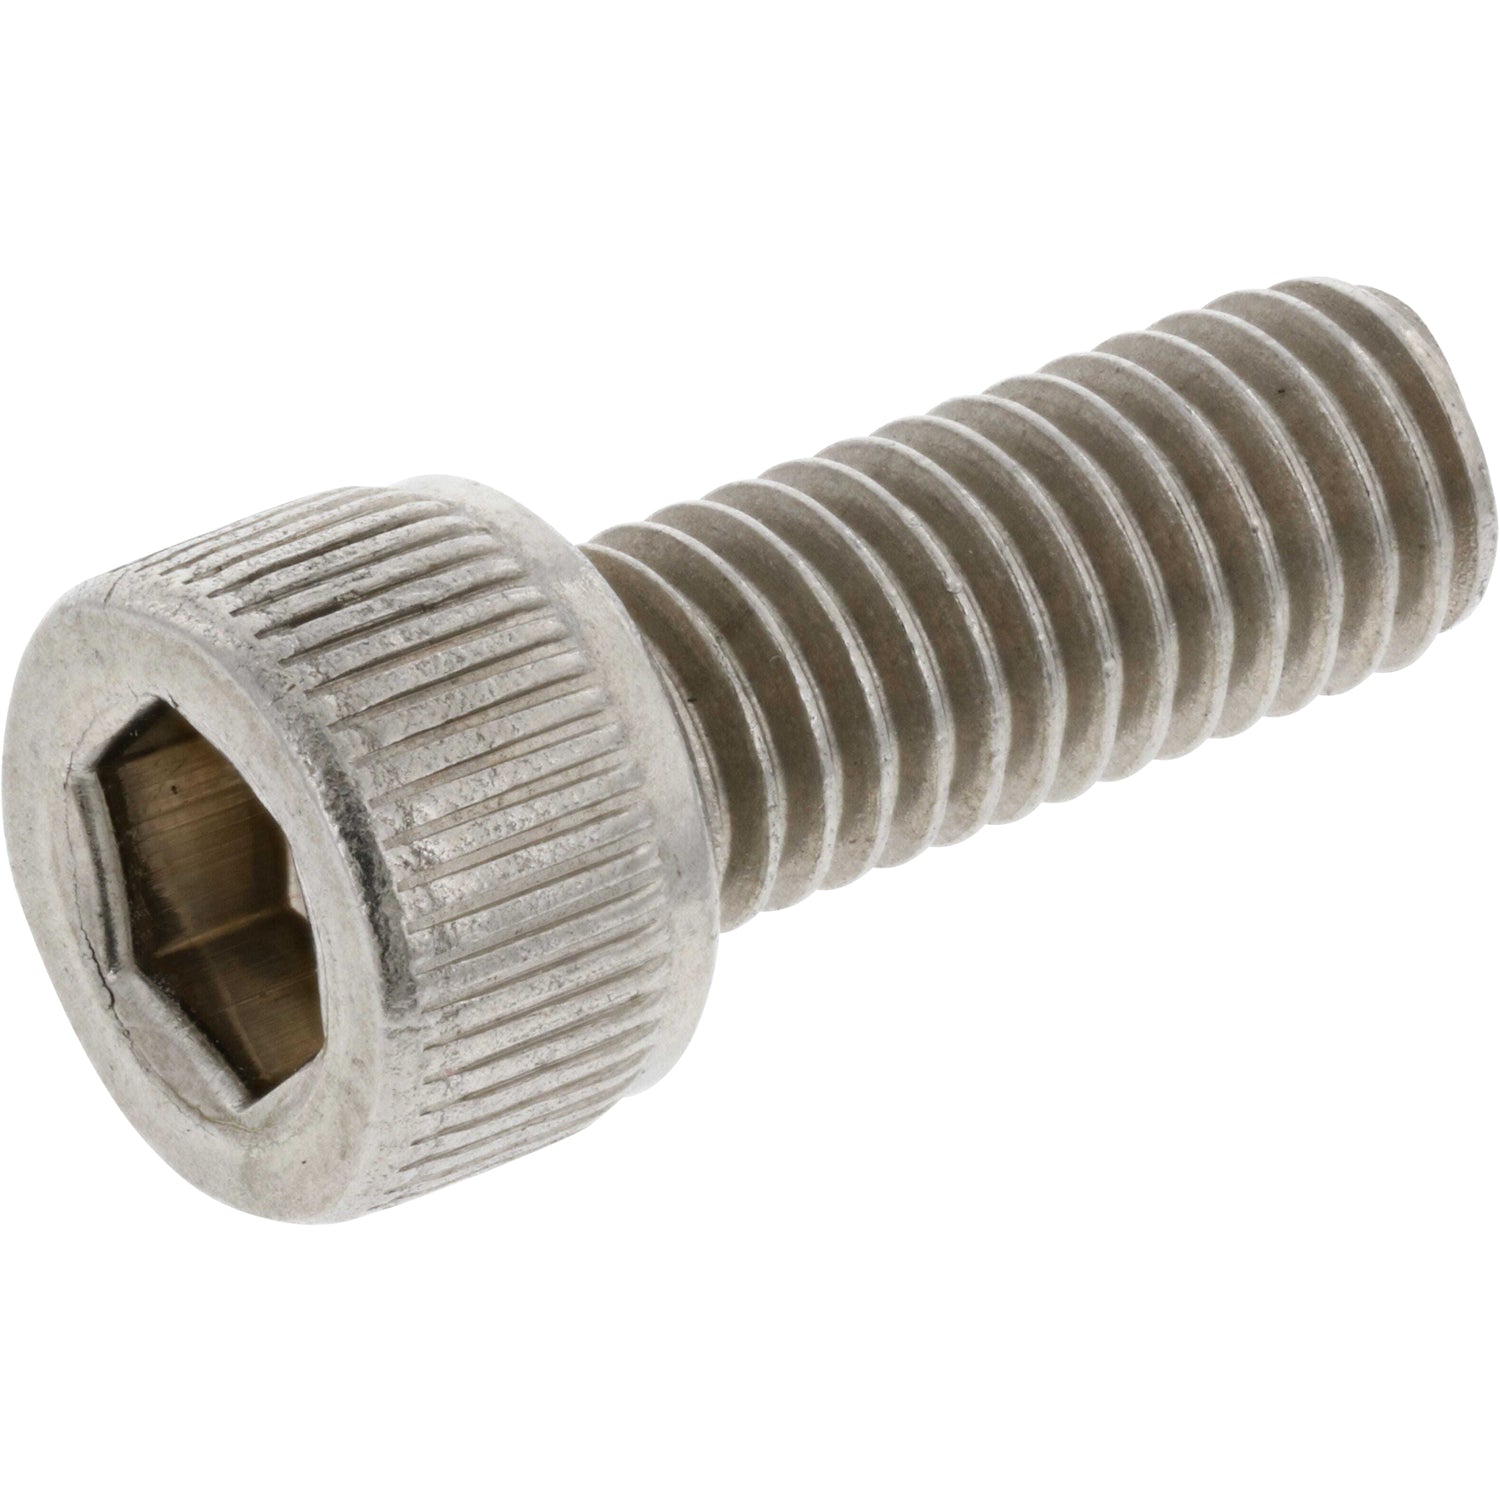 Stainless Steel M5 by 16 millimeter socket head cap screw on white background. MS2540016A20000